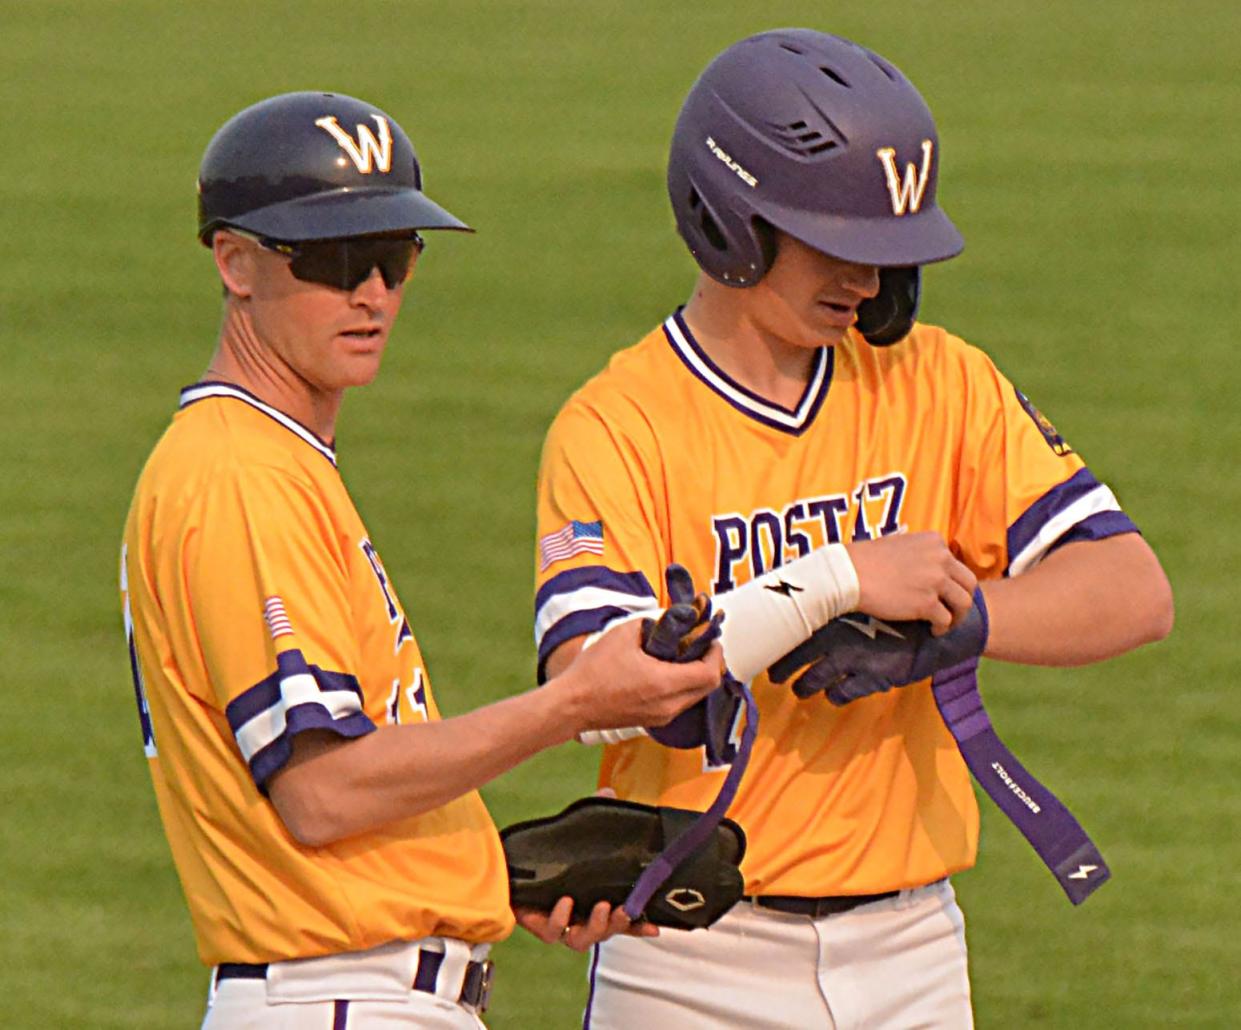 Watertown Post 17 head coach Ryan Neale gets some equipment from Treyton Himmerich after Himmerich tripled during a baseball doubleheader against West Fargo (N.D.) on Thursday, May 18, 2023 at Watertown Stadium.